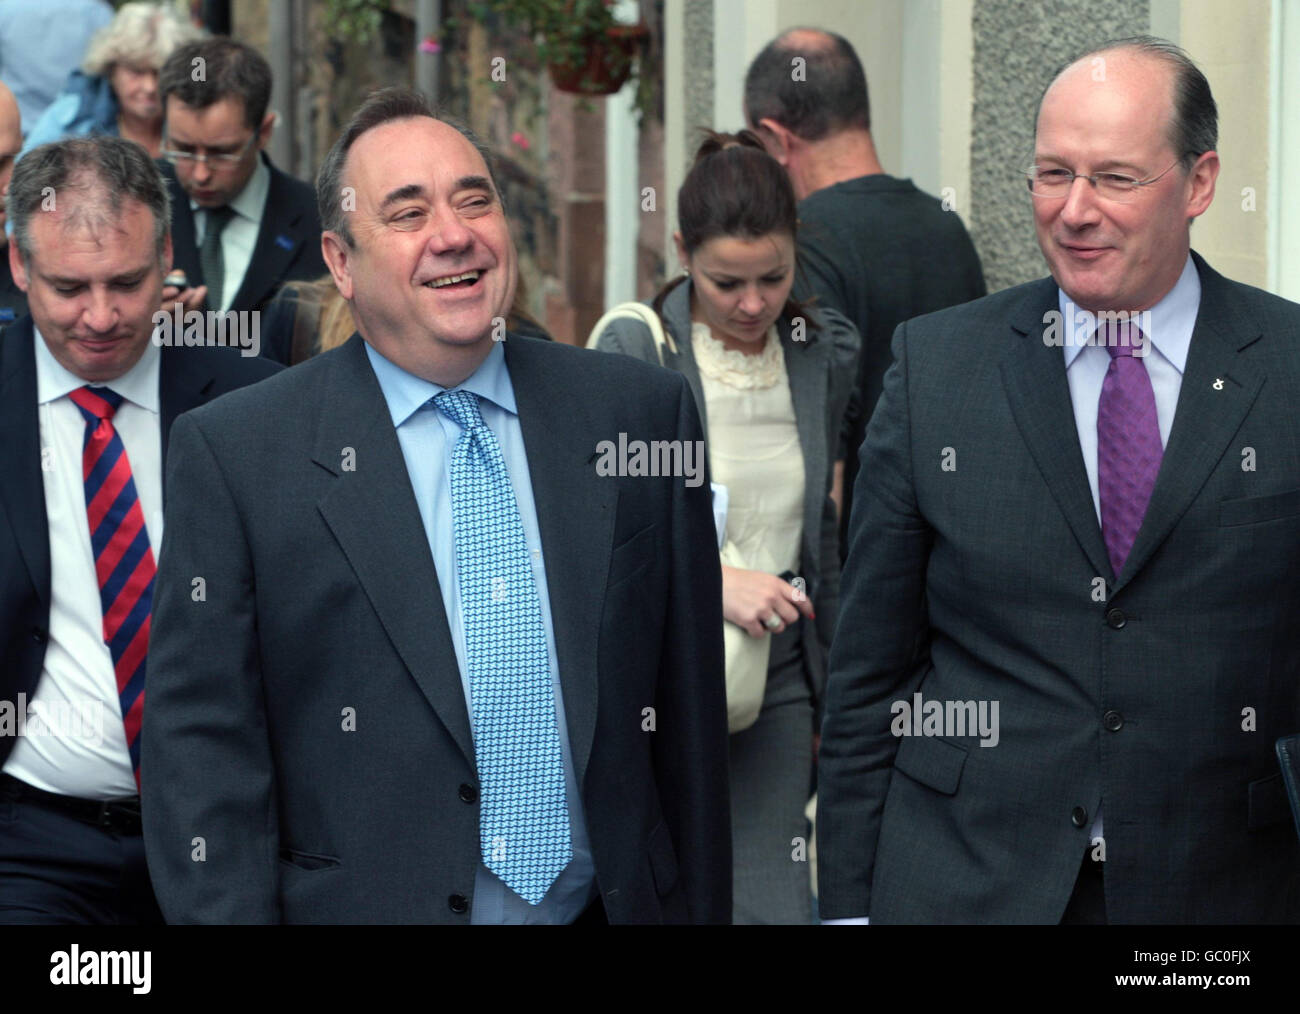 First Minister Alex Salmond (left) and Finance Secretary John Swinney walk up Melrose High street in the Scottish Borders after a Scottish cabinet meeting at Melrose Rugby Club the latest venue on its summer tour of Scotland. Stock Photo